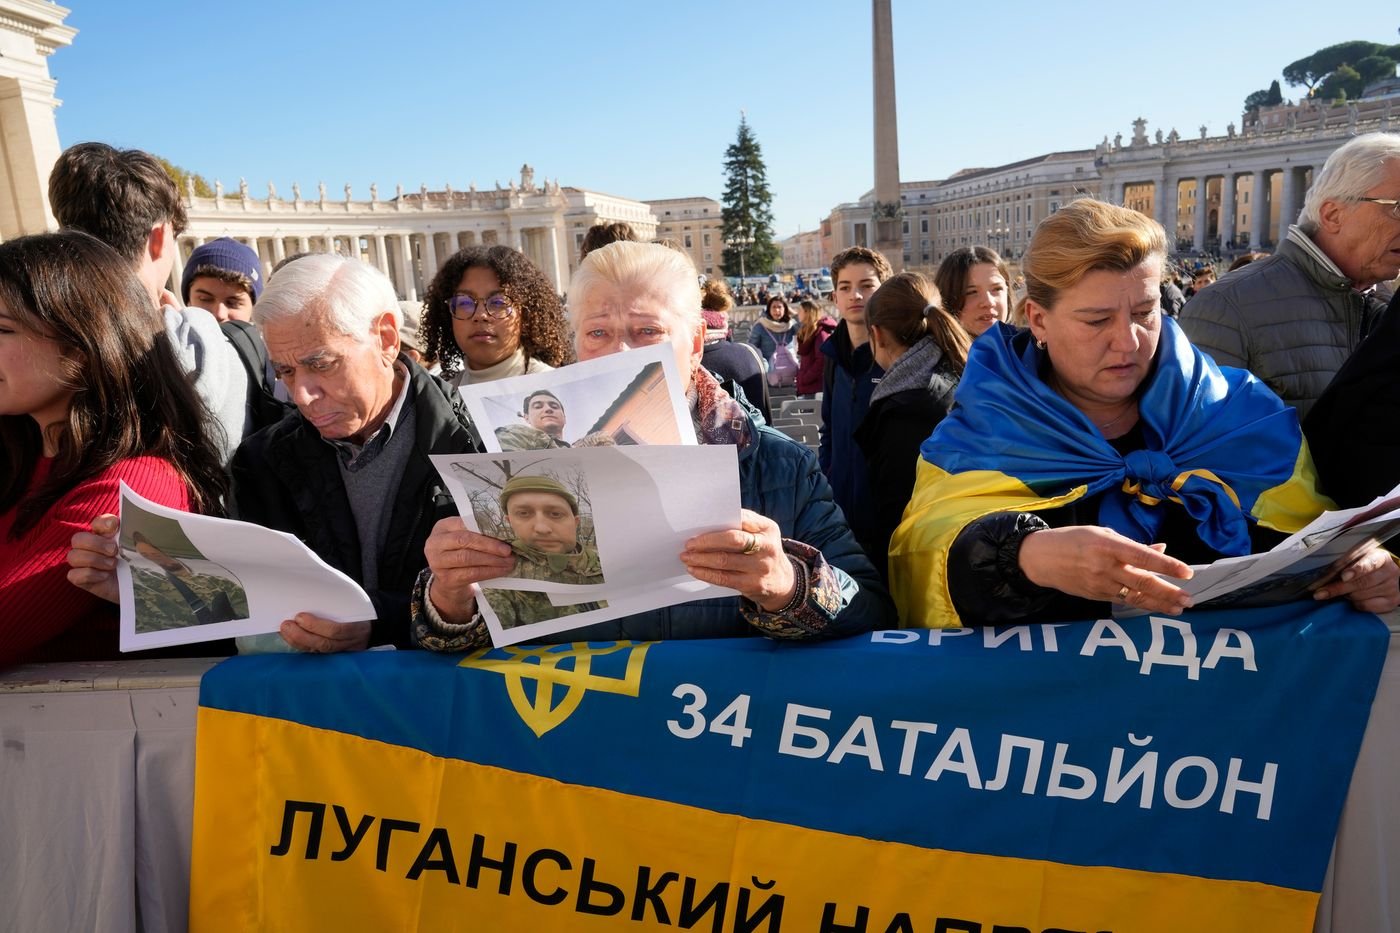 Ukrainians, with photos of missing soldiers, wait for Pope Francis to arrive in St. Peter's Square for the Wednesday audience